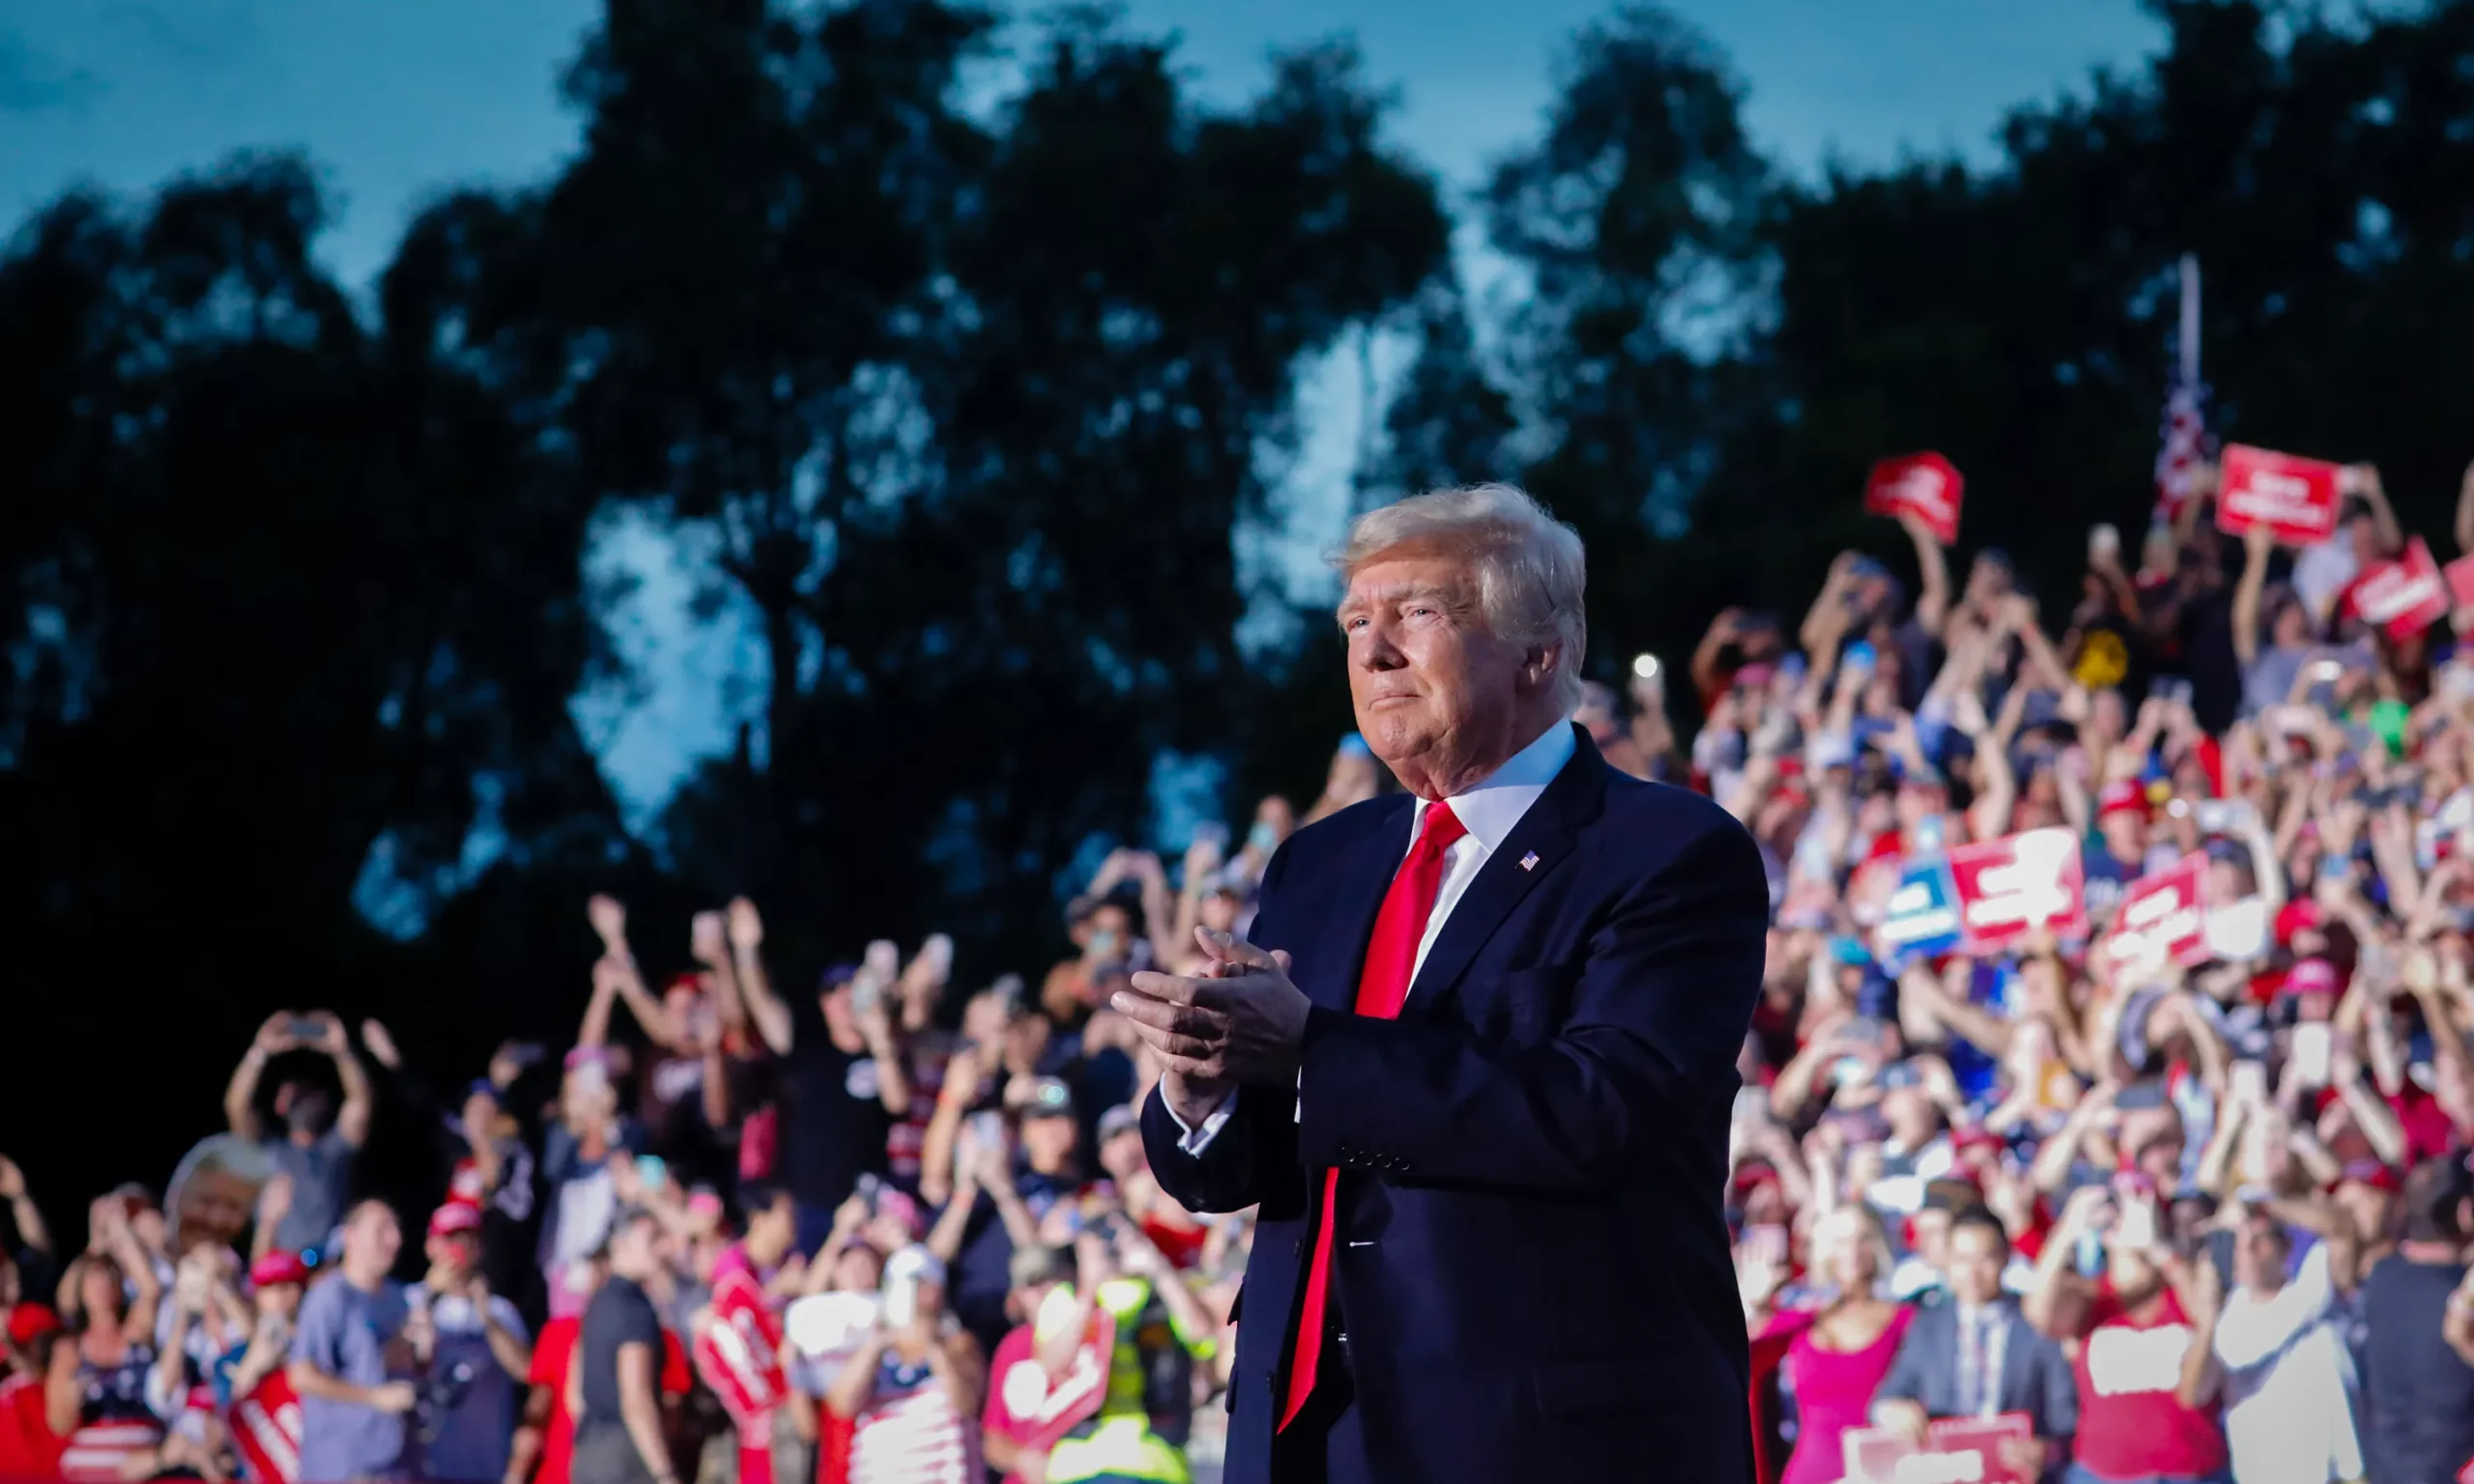 Investors are speculating that Trump's 2024 campaign and return to social media will spur a surge in NFT sales.